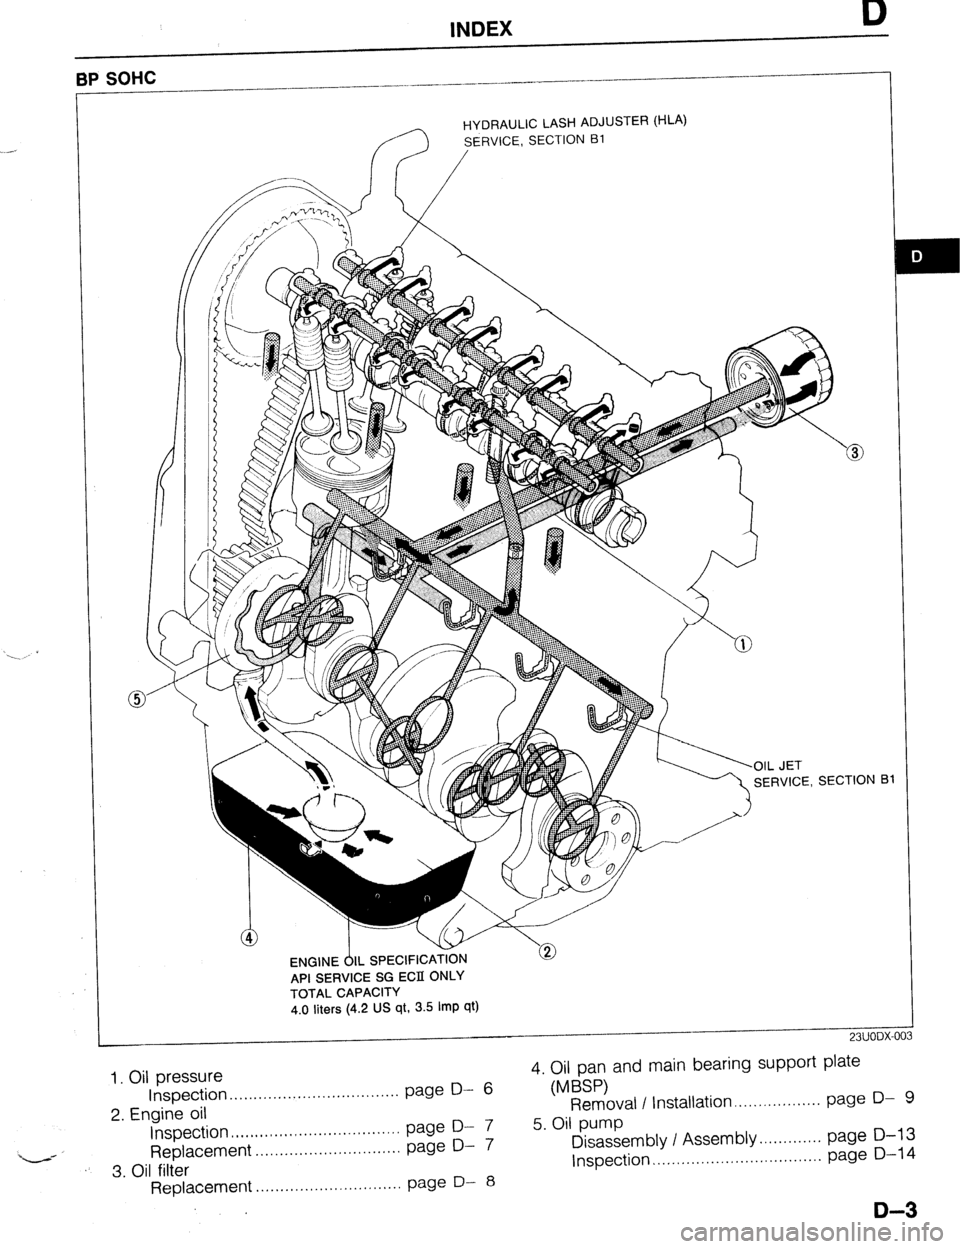 MAZDA 323 1989  Factory Repair Manual INDEX D 
/I? HYDRAULIC LASH ADJUSTER (HLA) 
SERVICE, SECTION Bl 
TION B‘ 
ENGINE &L SPECIFICATION 
API SERVICE SG ECII ONLY 
TOTAL CAPACITY 
4.0 liters (4.2 US qt, 3.5 Imp qt) 
I 23UODX-003 
1. Oil 